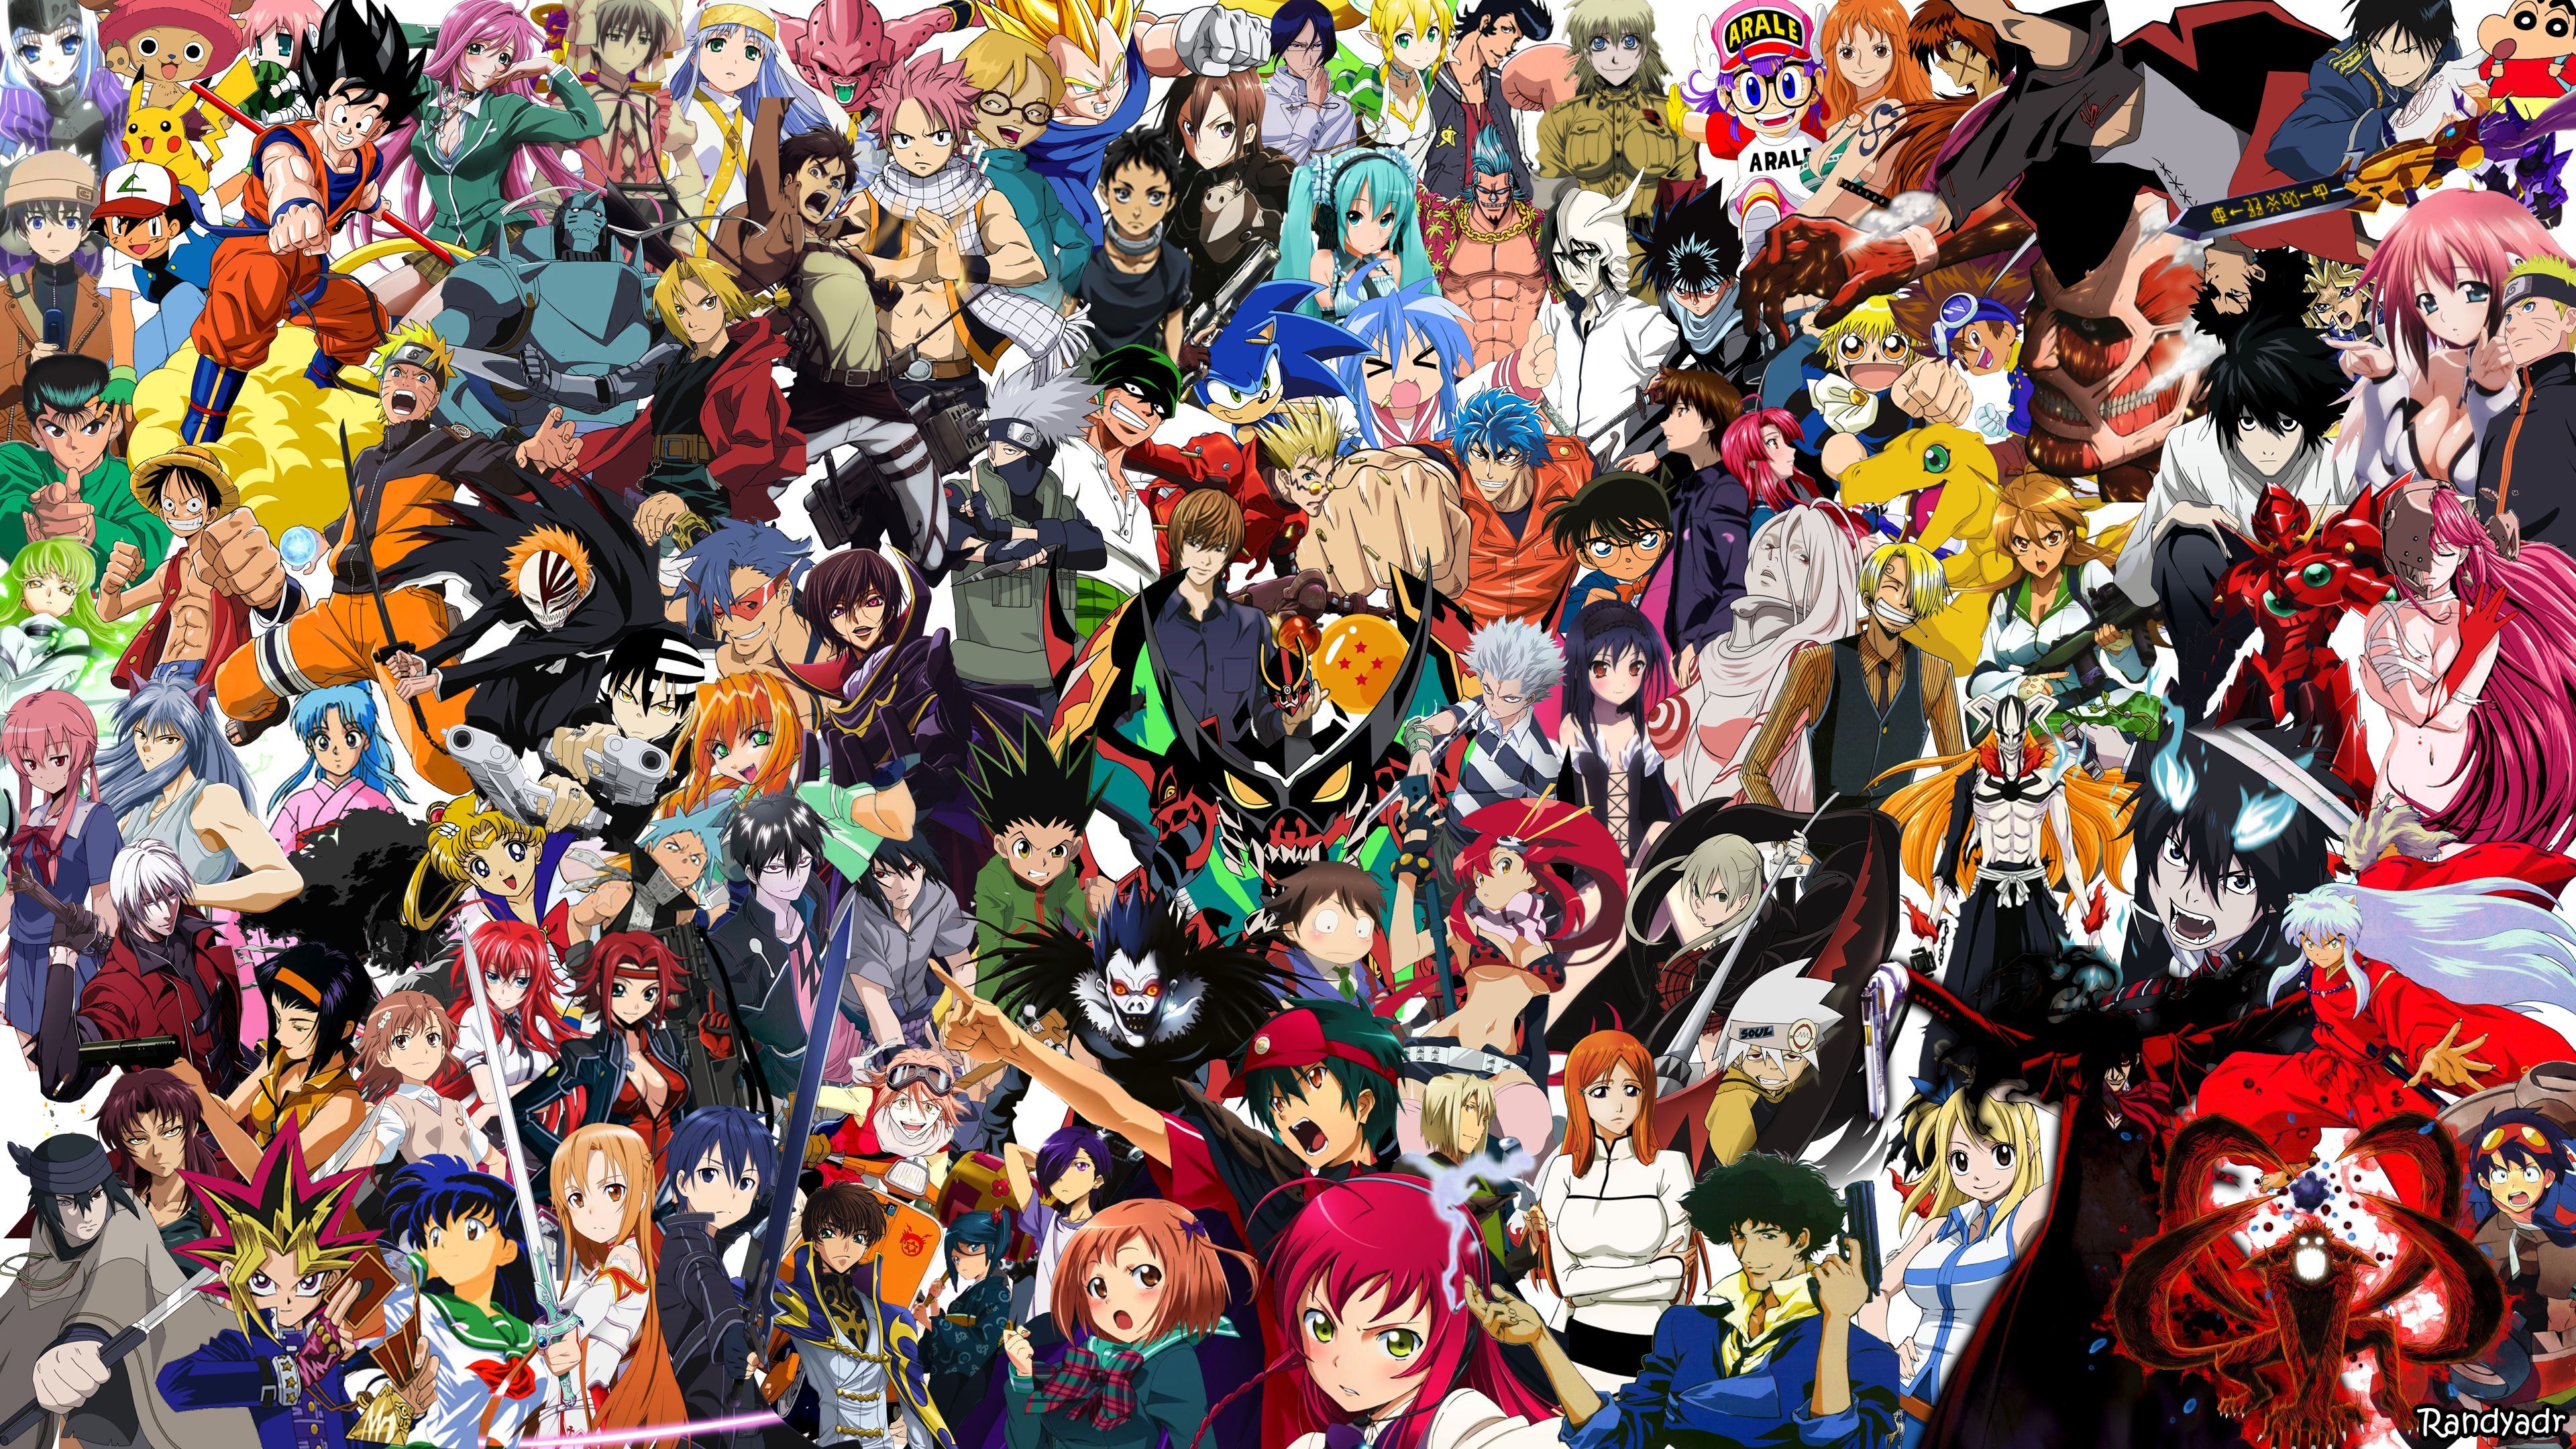 Anime Collage Wallpaper Free Anime Collage